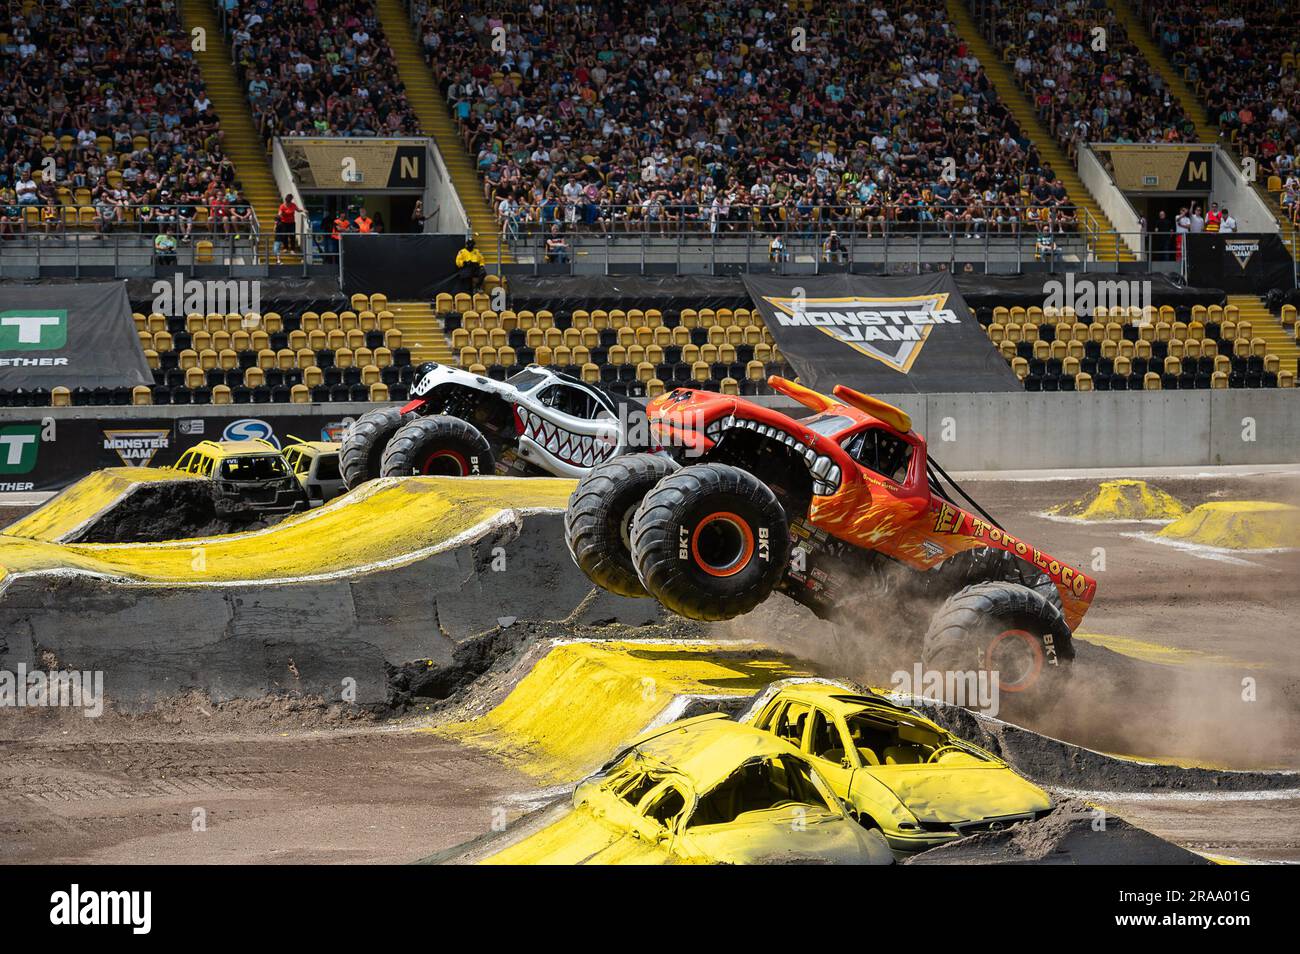 Dresden, Germany. 02nd July, 2023. (L-r): Monster truck 'MONSTER MUTT DALMATIAN' and 'EL TORO LOCO' jumping over ramps at the monster truck show 'Monster Jam' at the Rudolf Harbig Stadium in Dresden, Germany Credit: Paul Glaser/dpa/Alamy Live News Stock Photo